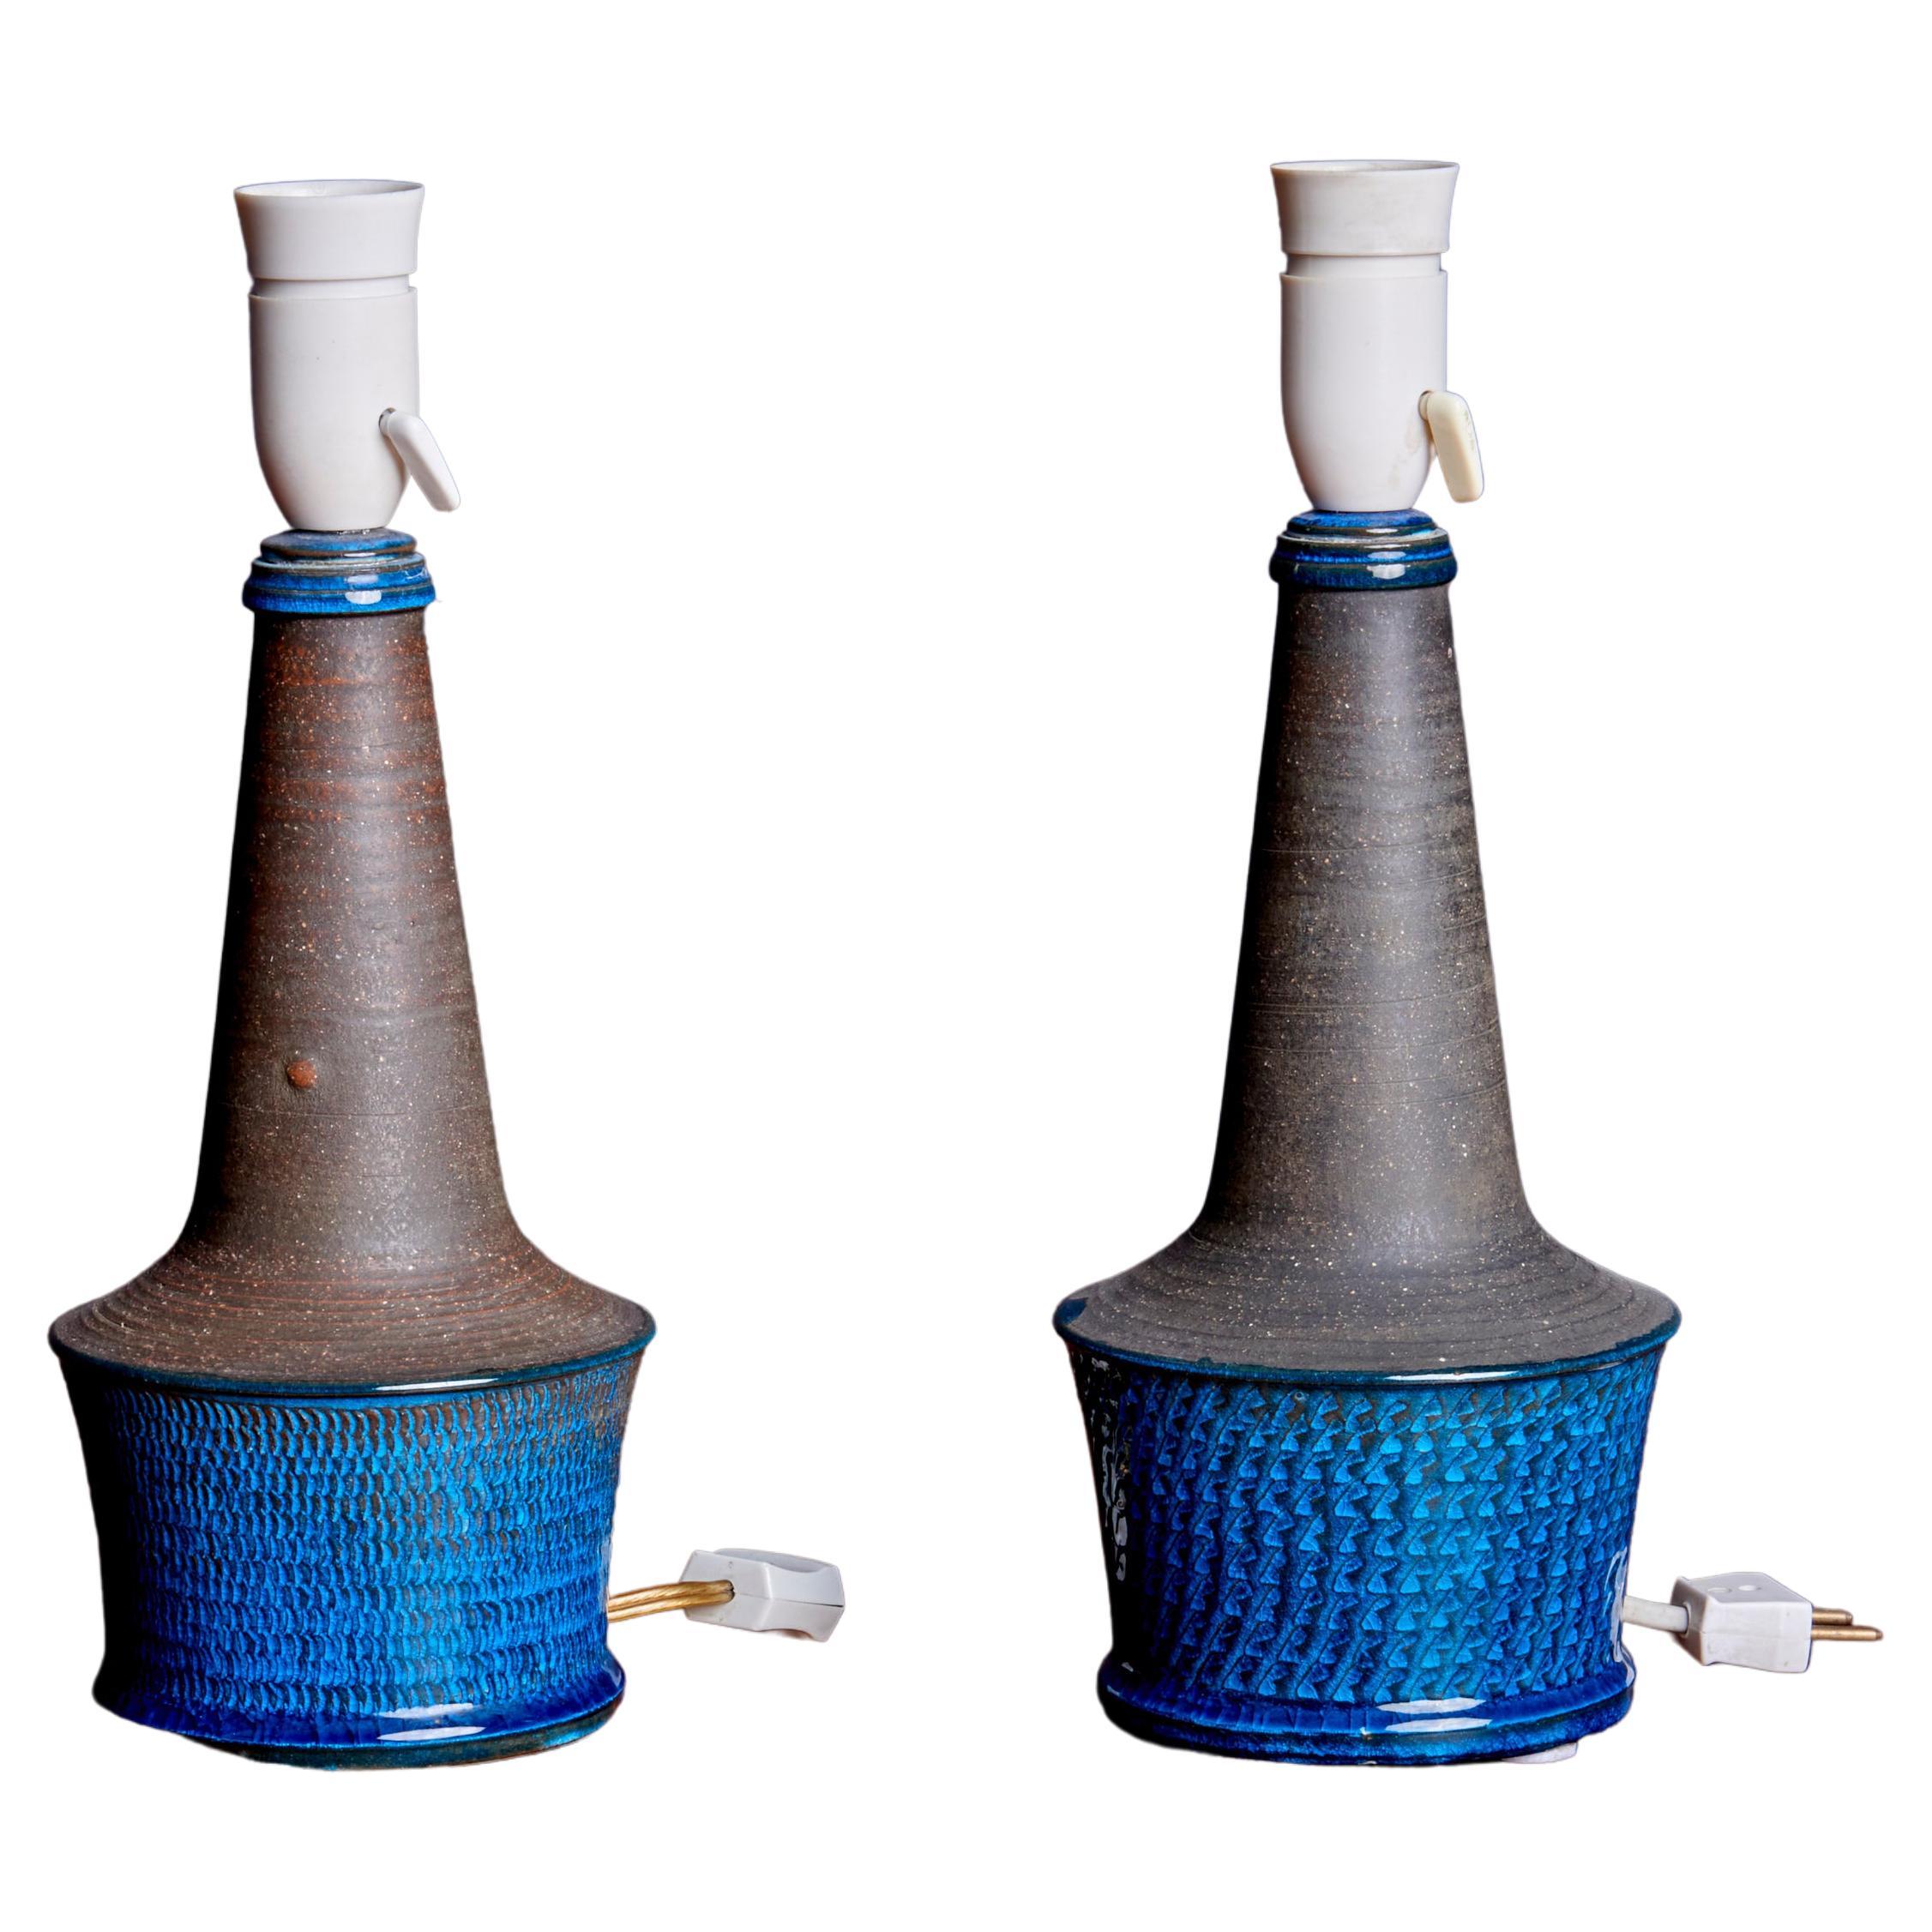 Pair of  Blue / Gray Table Lamps by Nils Kähler, Denmark, 1960s For Sale